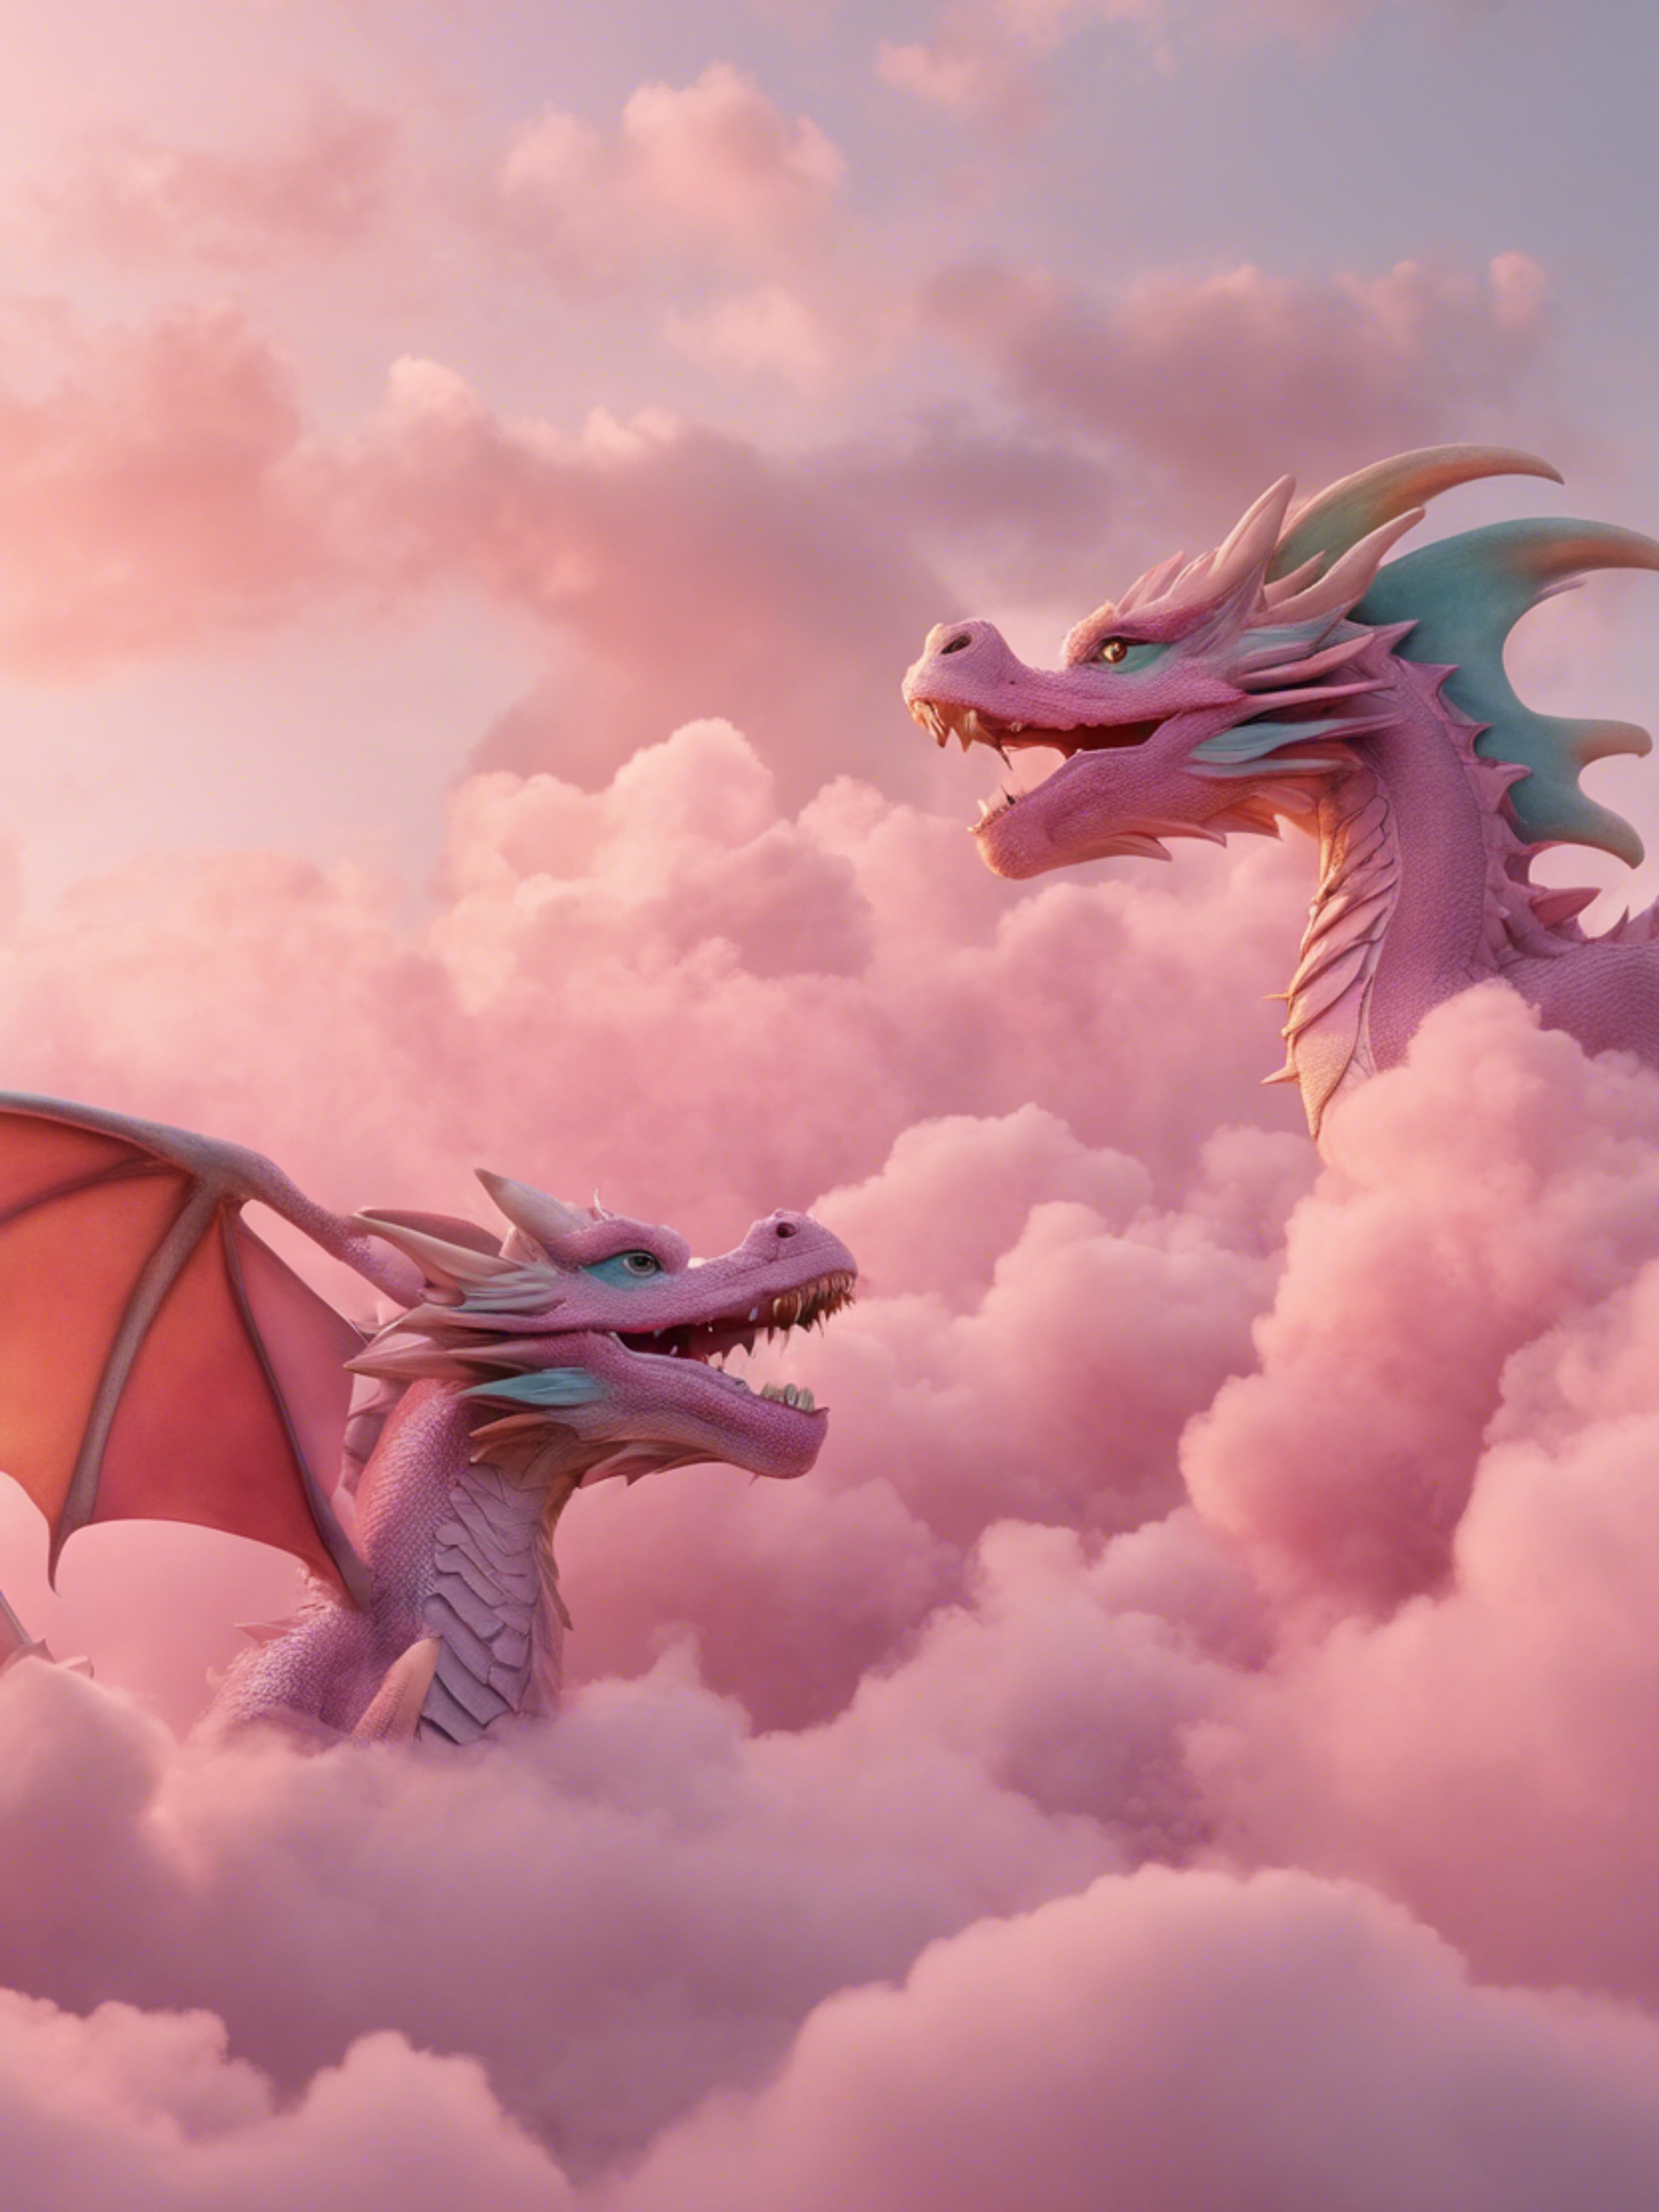 Trio of playful pastel-colored dragons flitting among fluffy pink clouds during sunrise. Behang[e1ca69721ca941939a18]